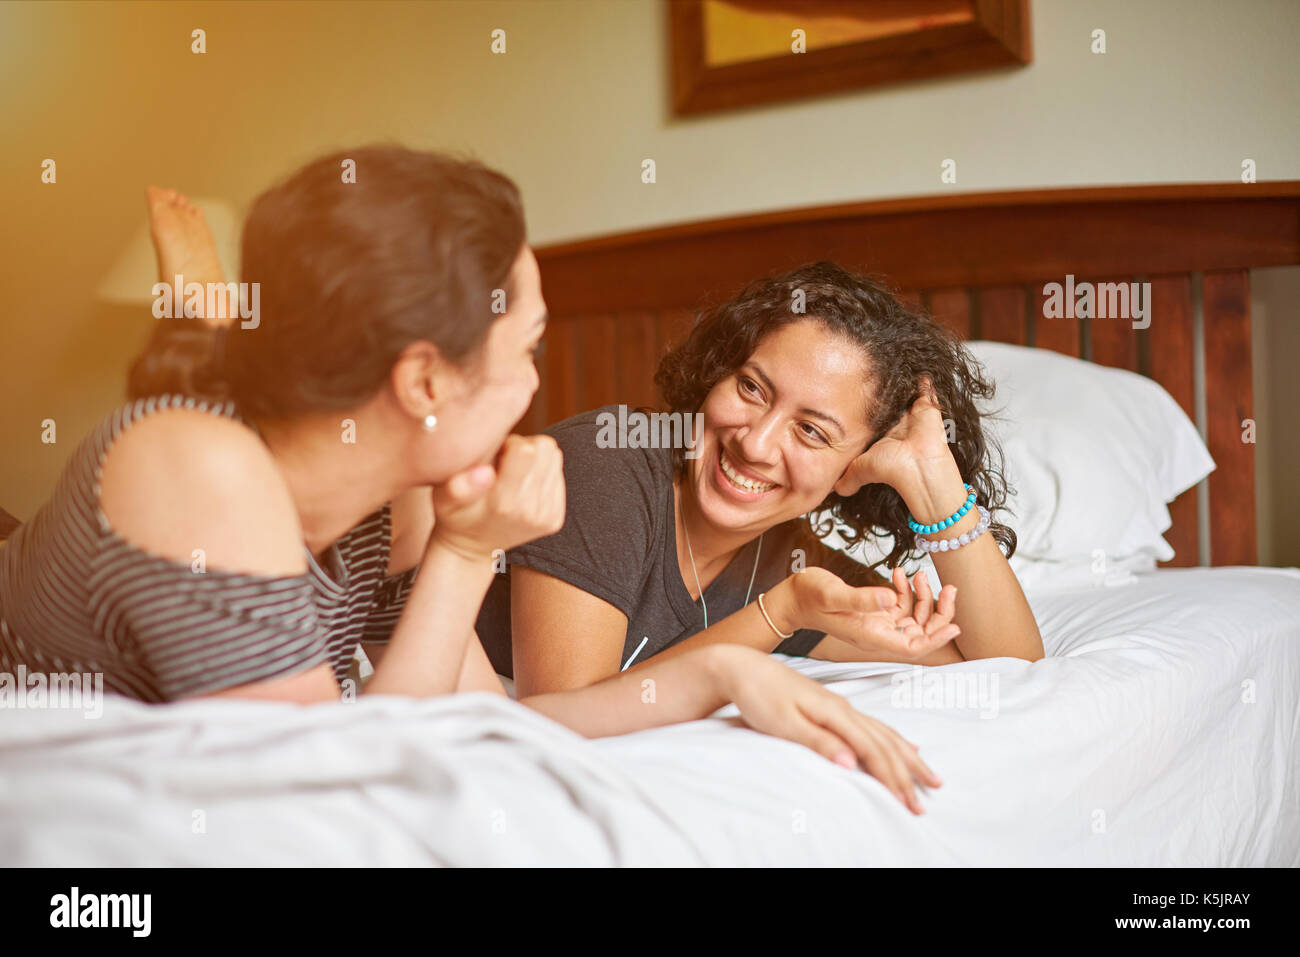 Two younf woman talk laying on bed Stock Photo